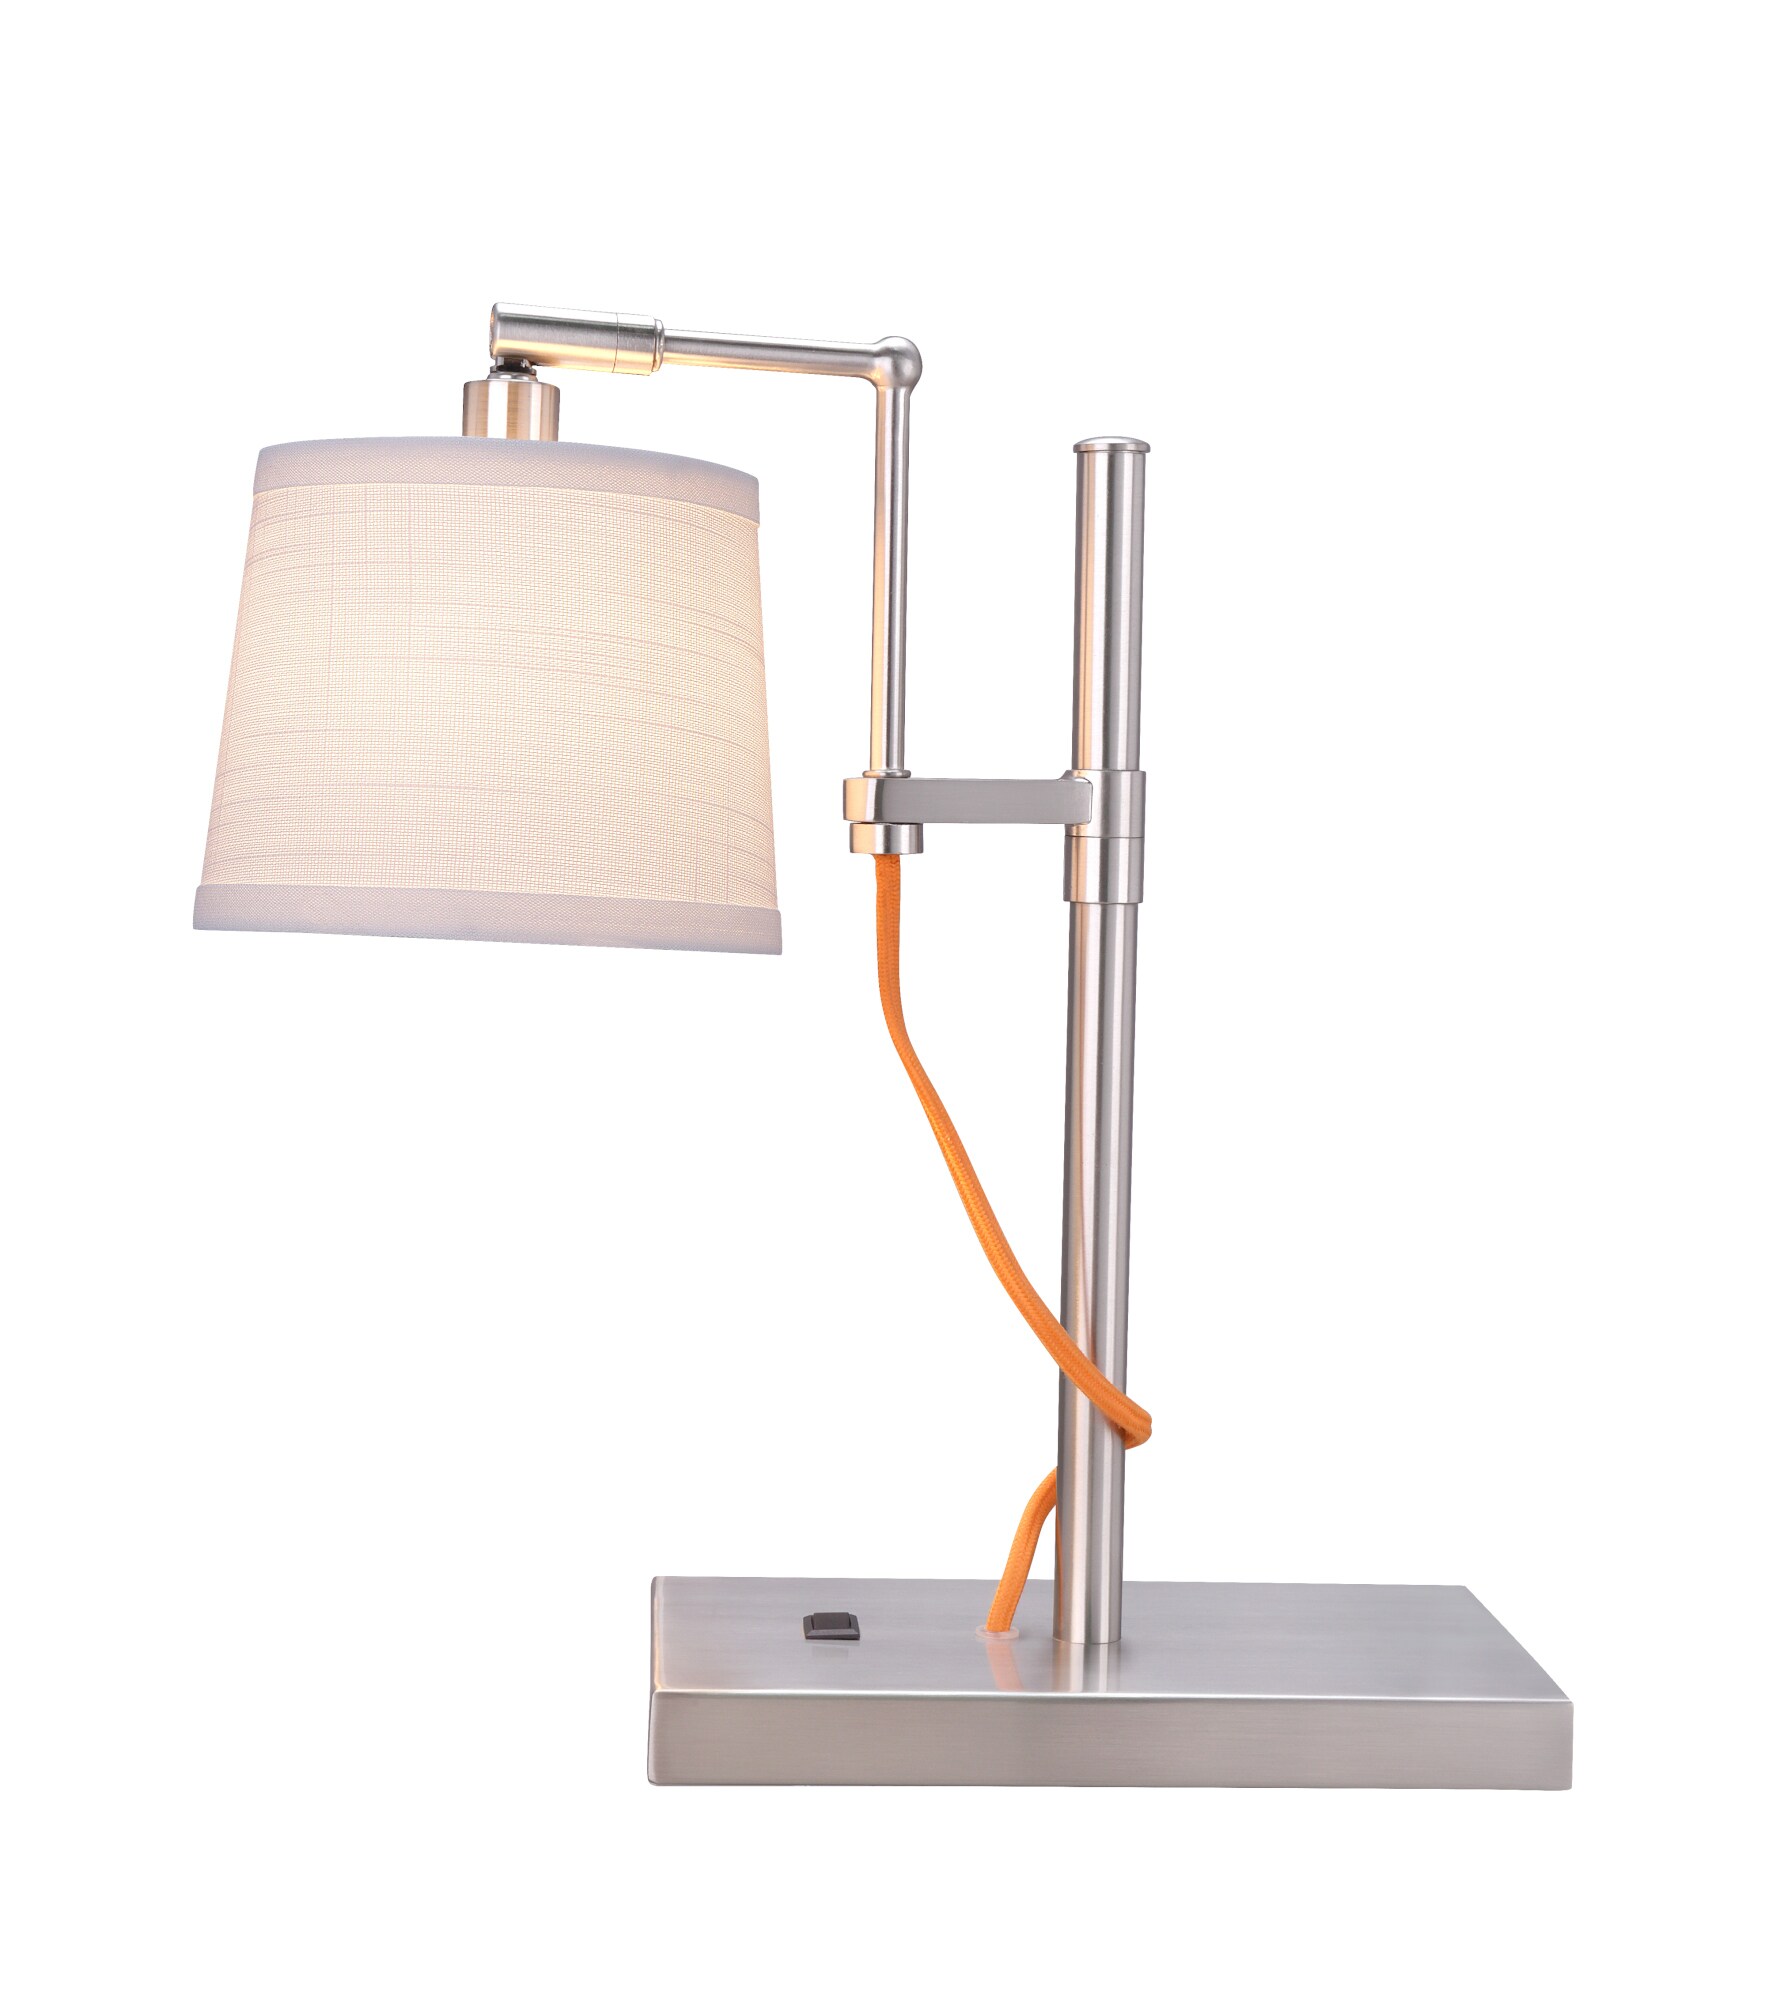 Nickel Desk Lamps at Lowes.com